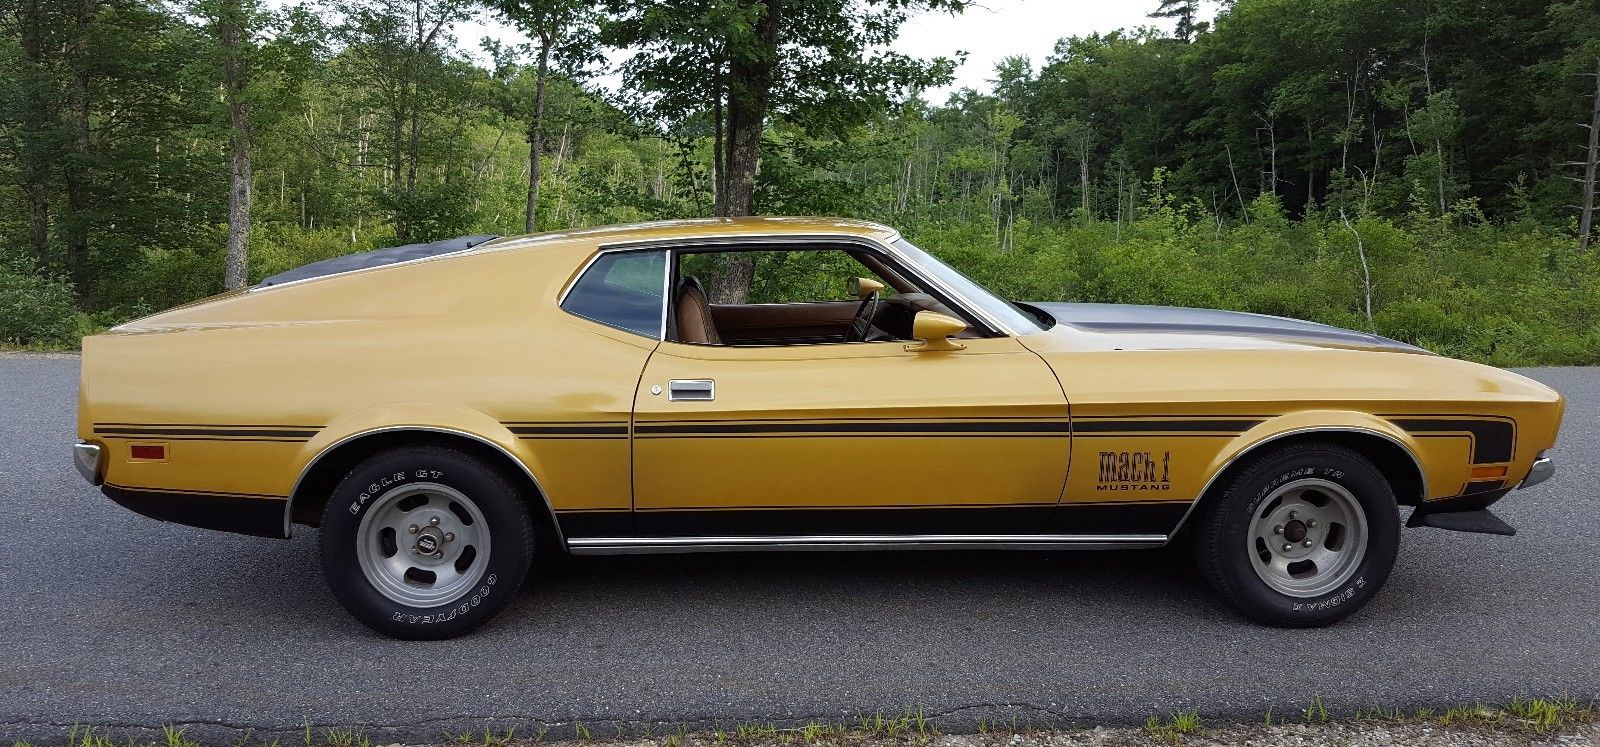 1972 Ford Mustang Mach 1 Fastback Is A Classic That Won't Cost You A ...